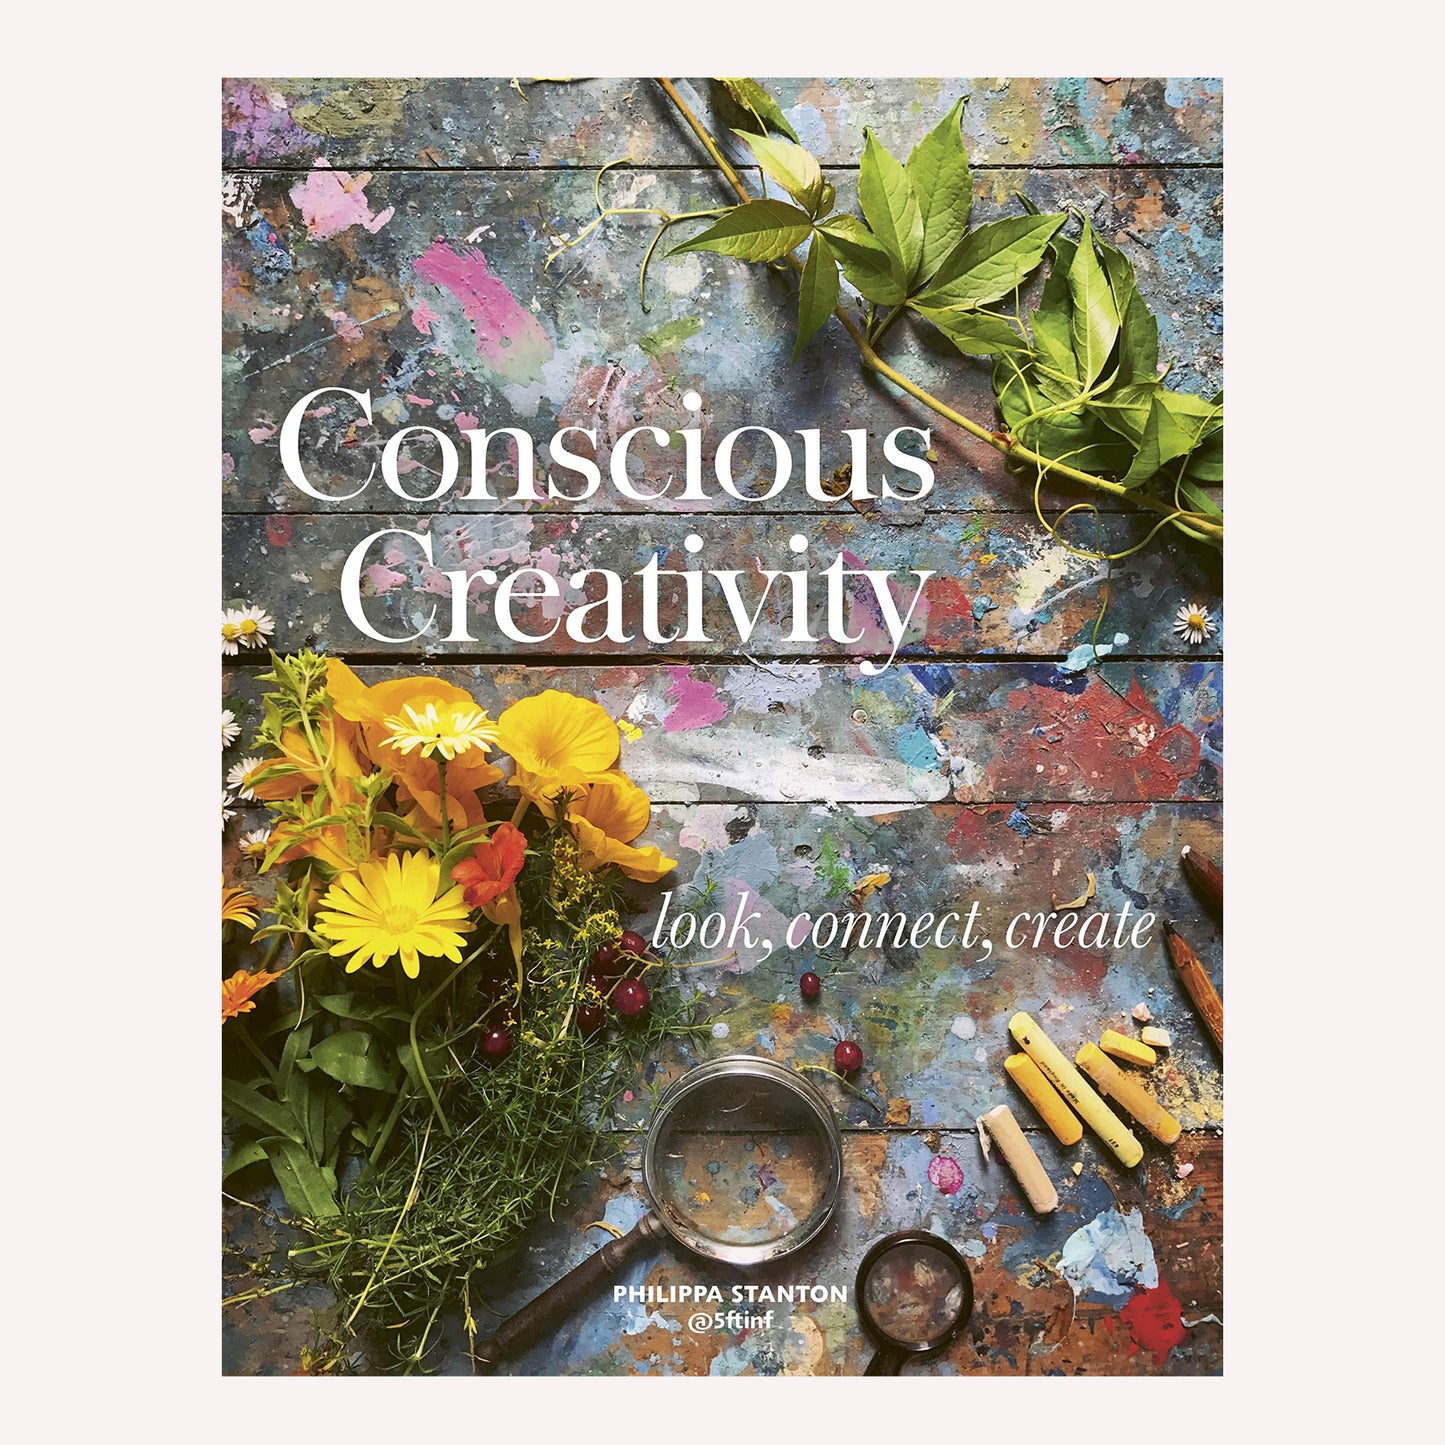 Book Cover titled “Conscious Creativity” by Philippa Stanton. The cover image worn tabletop covered in paint with leaves, flowers and art materials. 